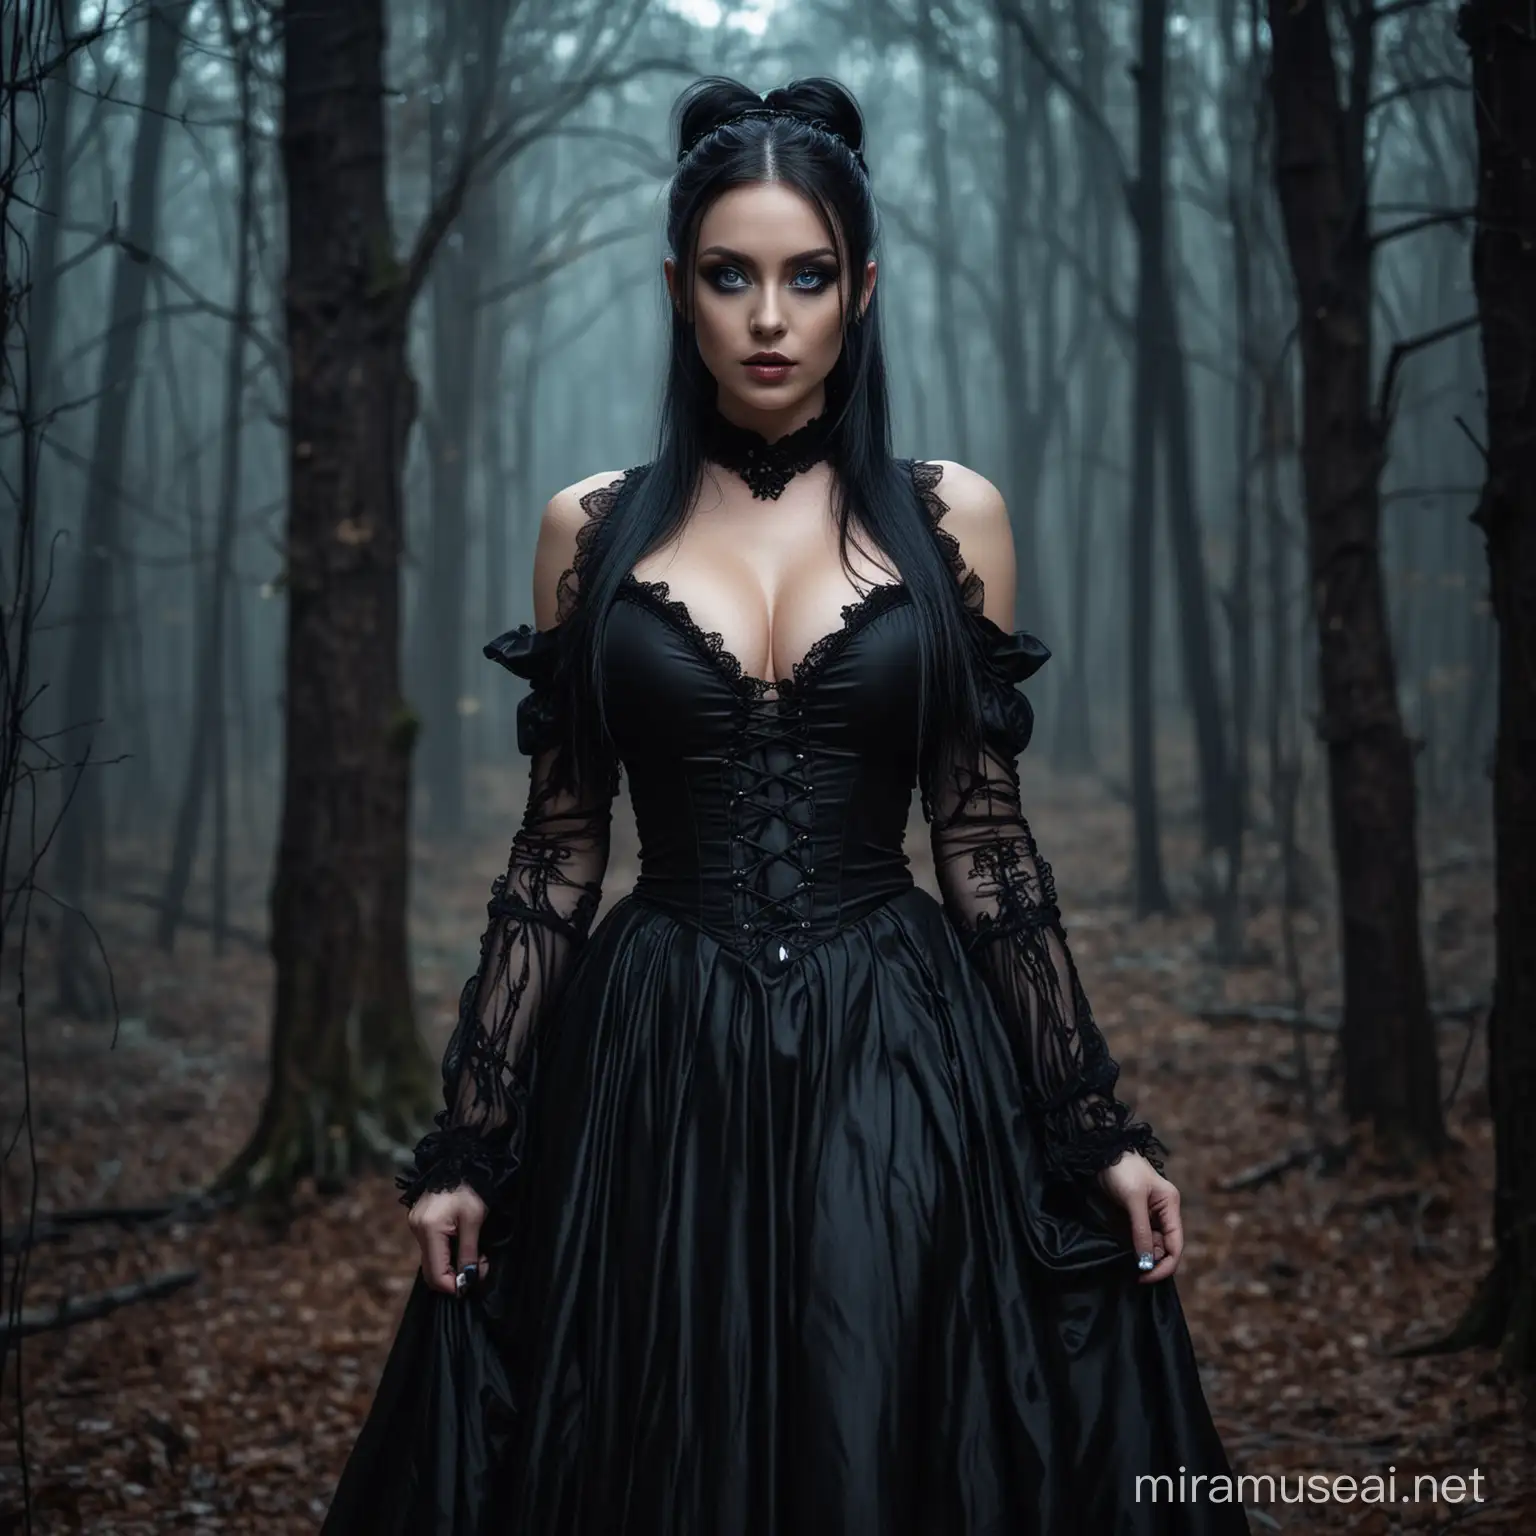 Gothic Vampire Model with Glowing Blue Eyes in Enchanted Forest